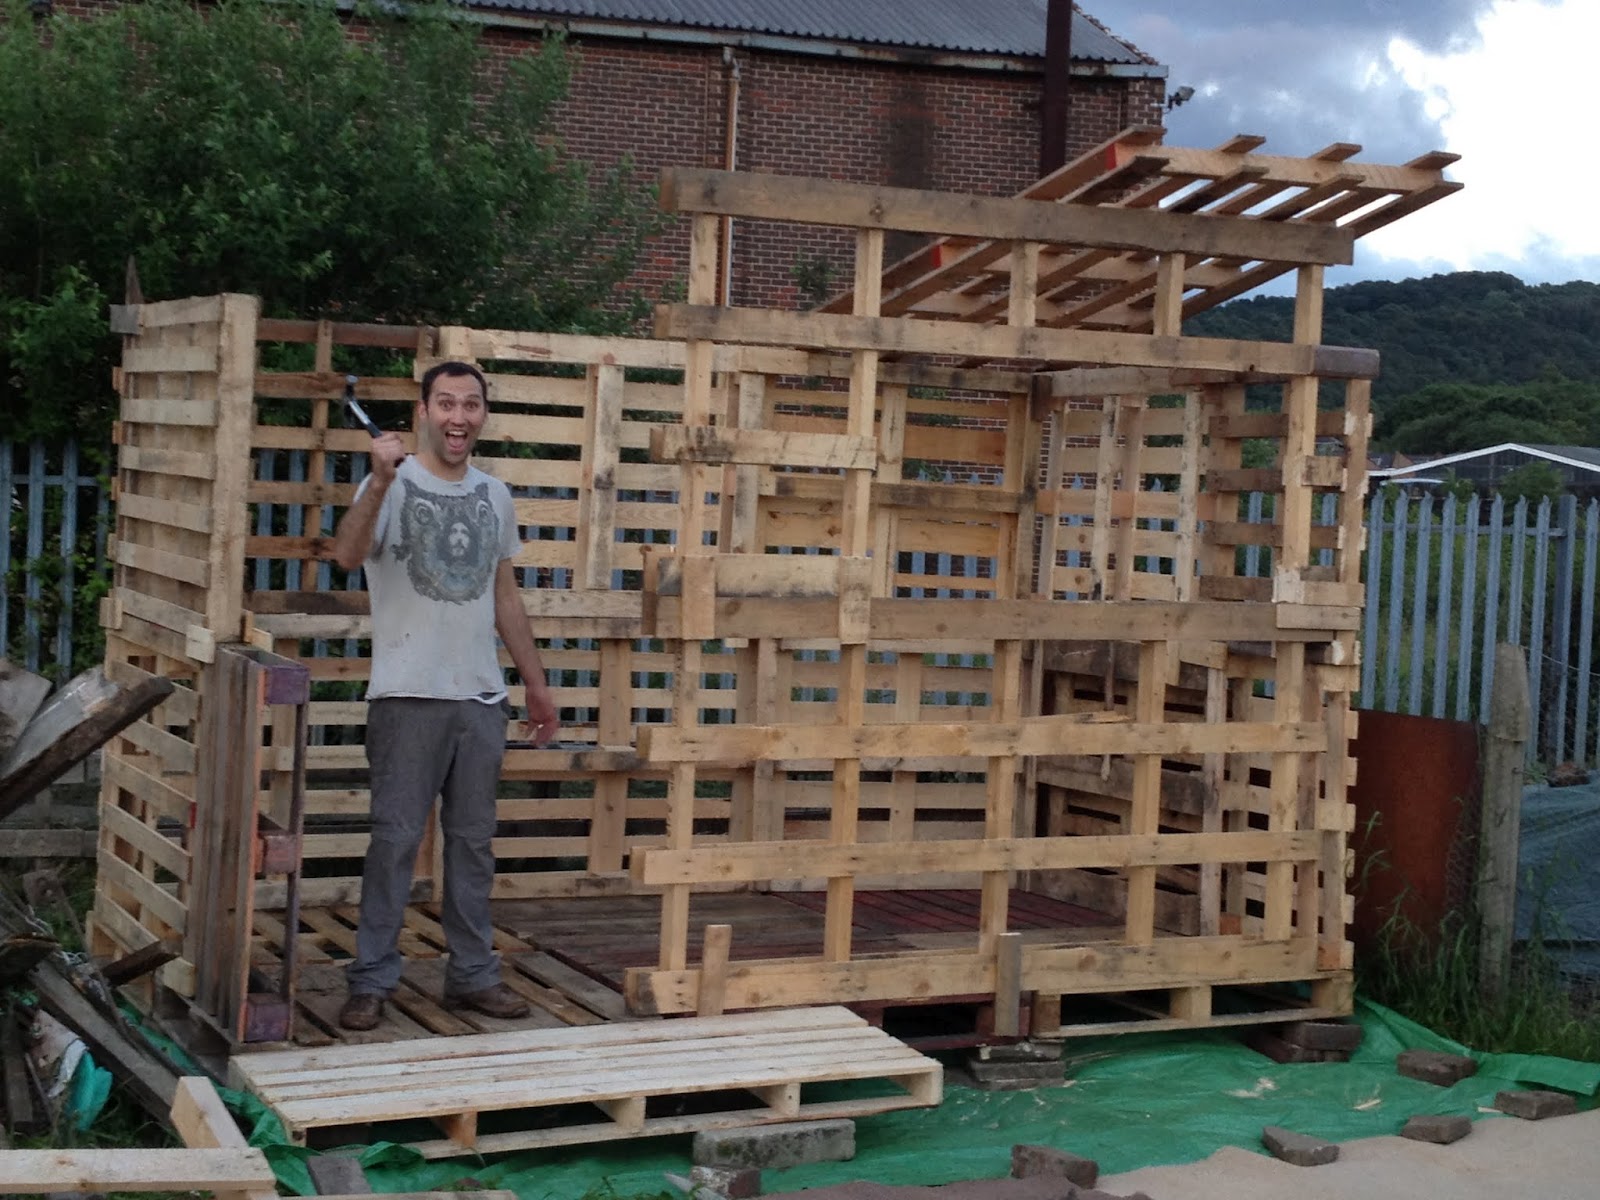 My Yorkshire Allotment: The Pallet shed build